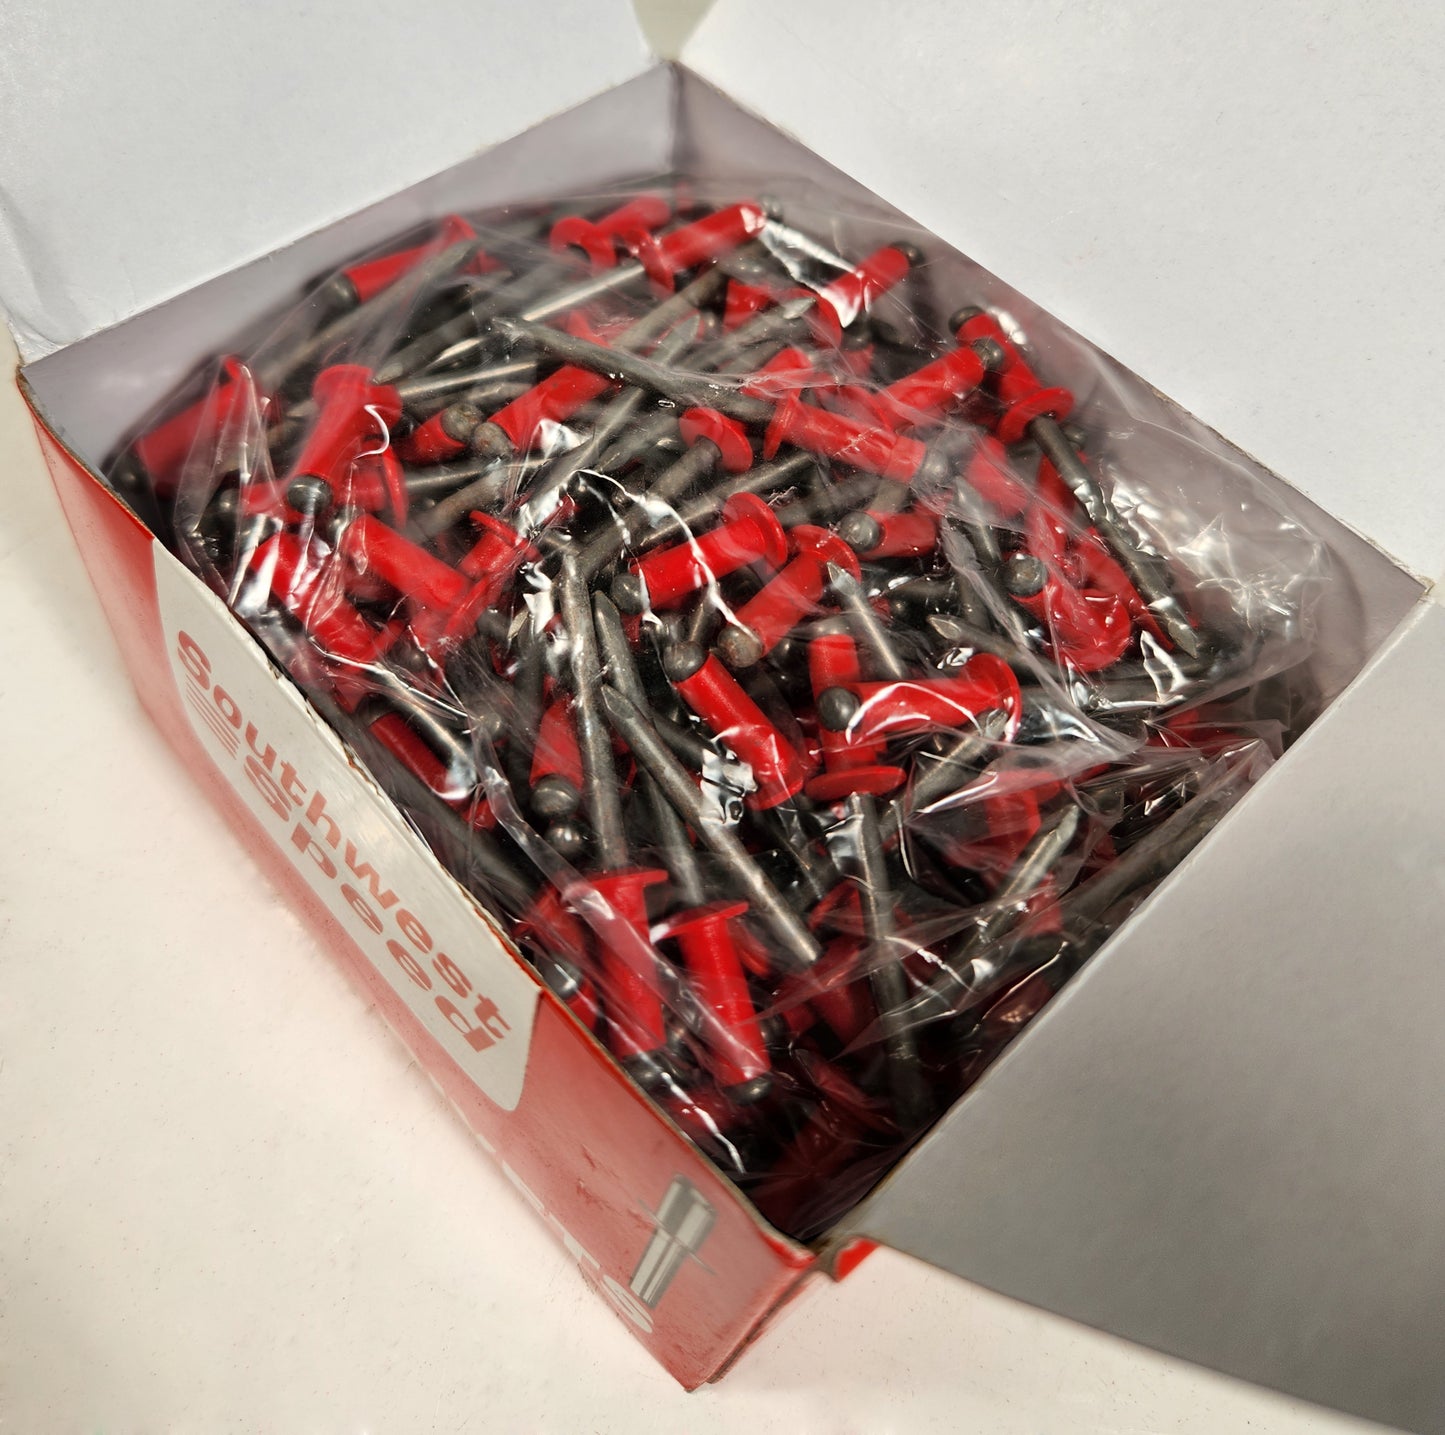 POP RIVETS,ALUMINUM FLANGE,STEEL PIN,SMALL HEAD,250 PIECES,RED